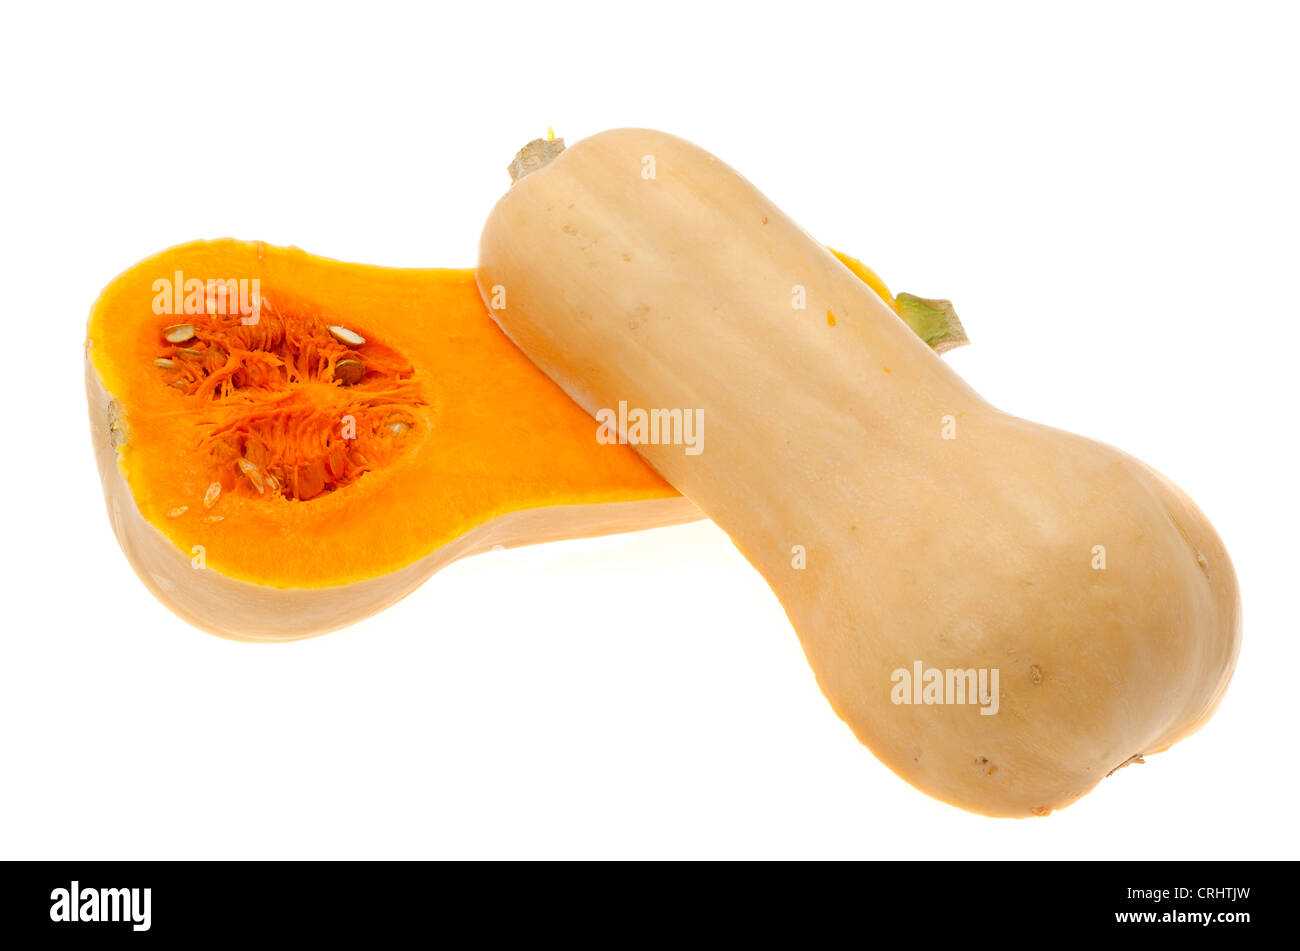 Two halves of a Butternut Squash - studio shot with a white background Stock Photo